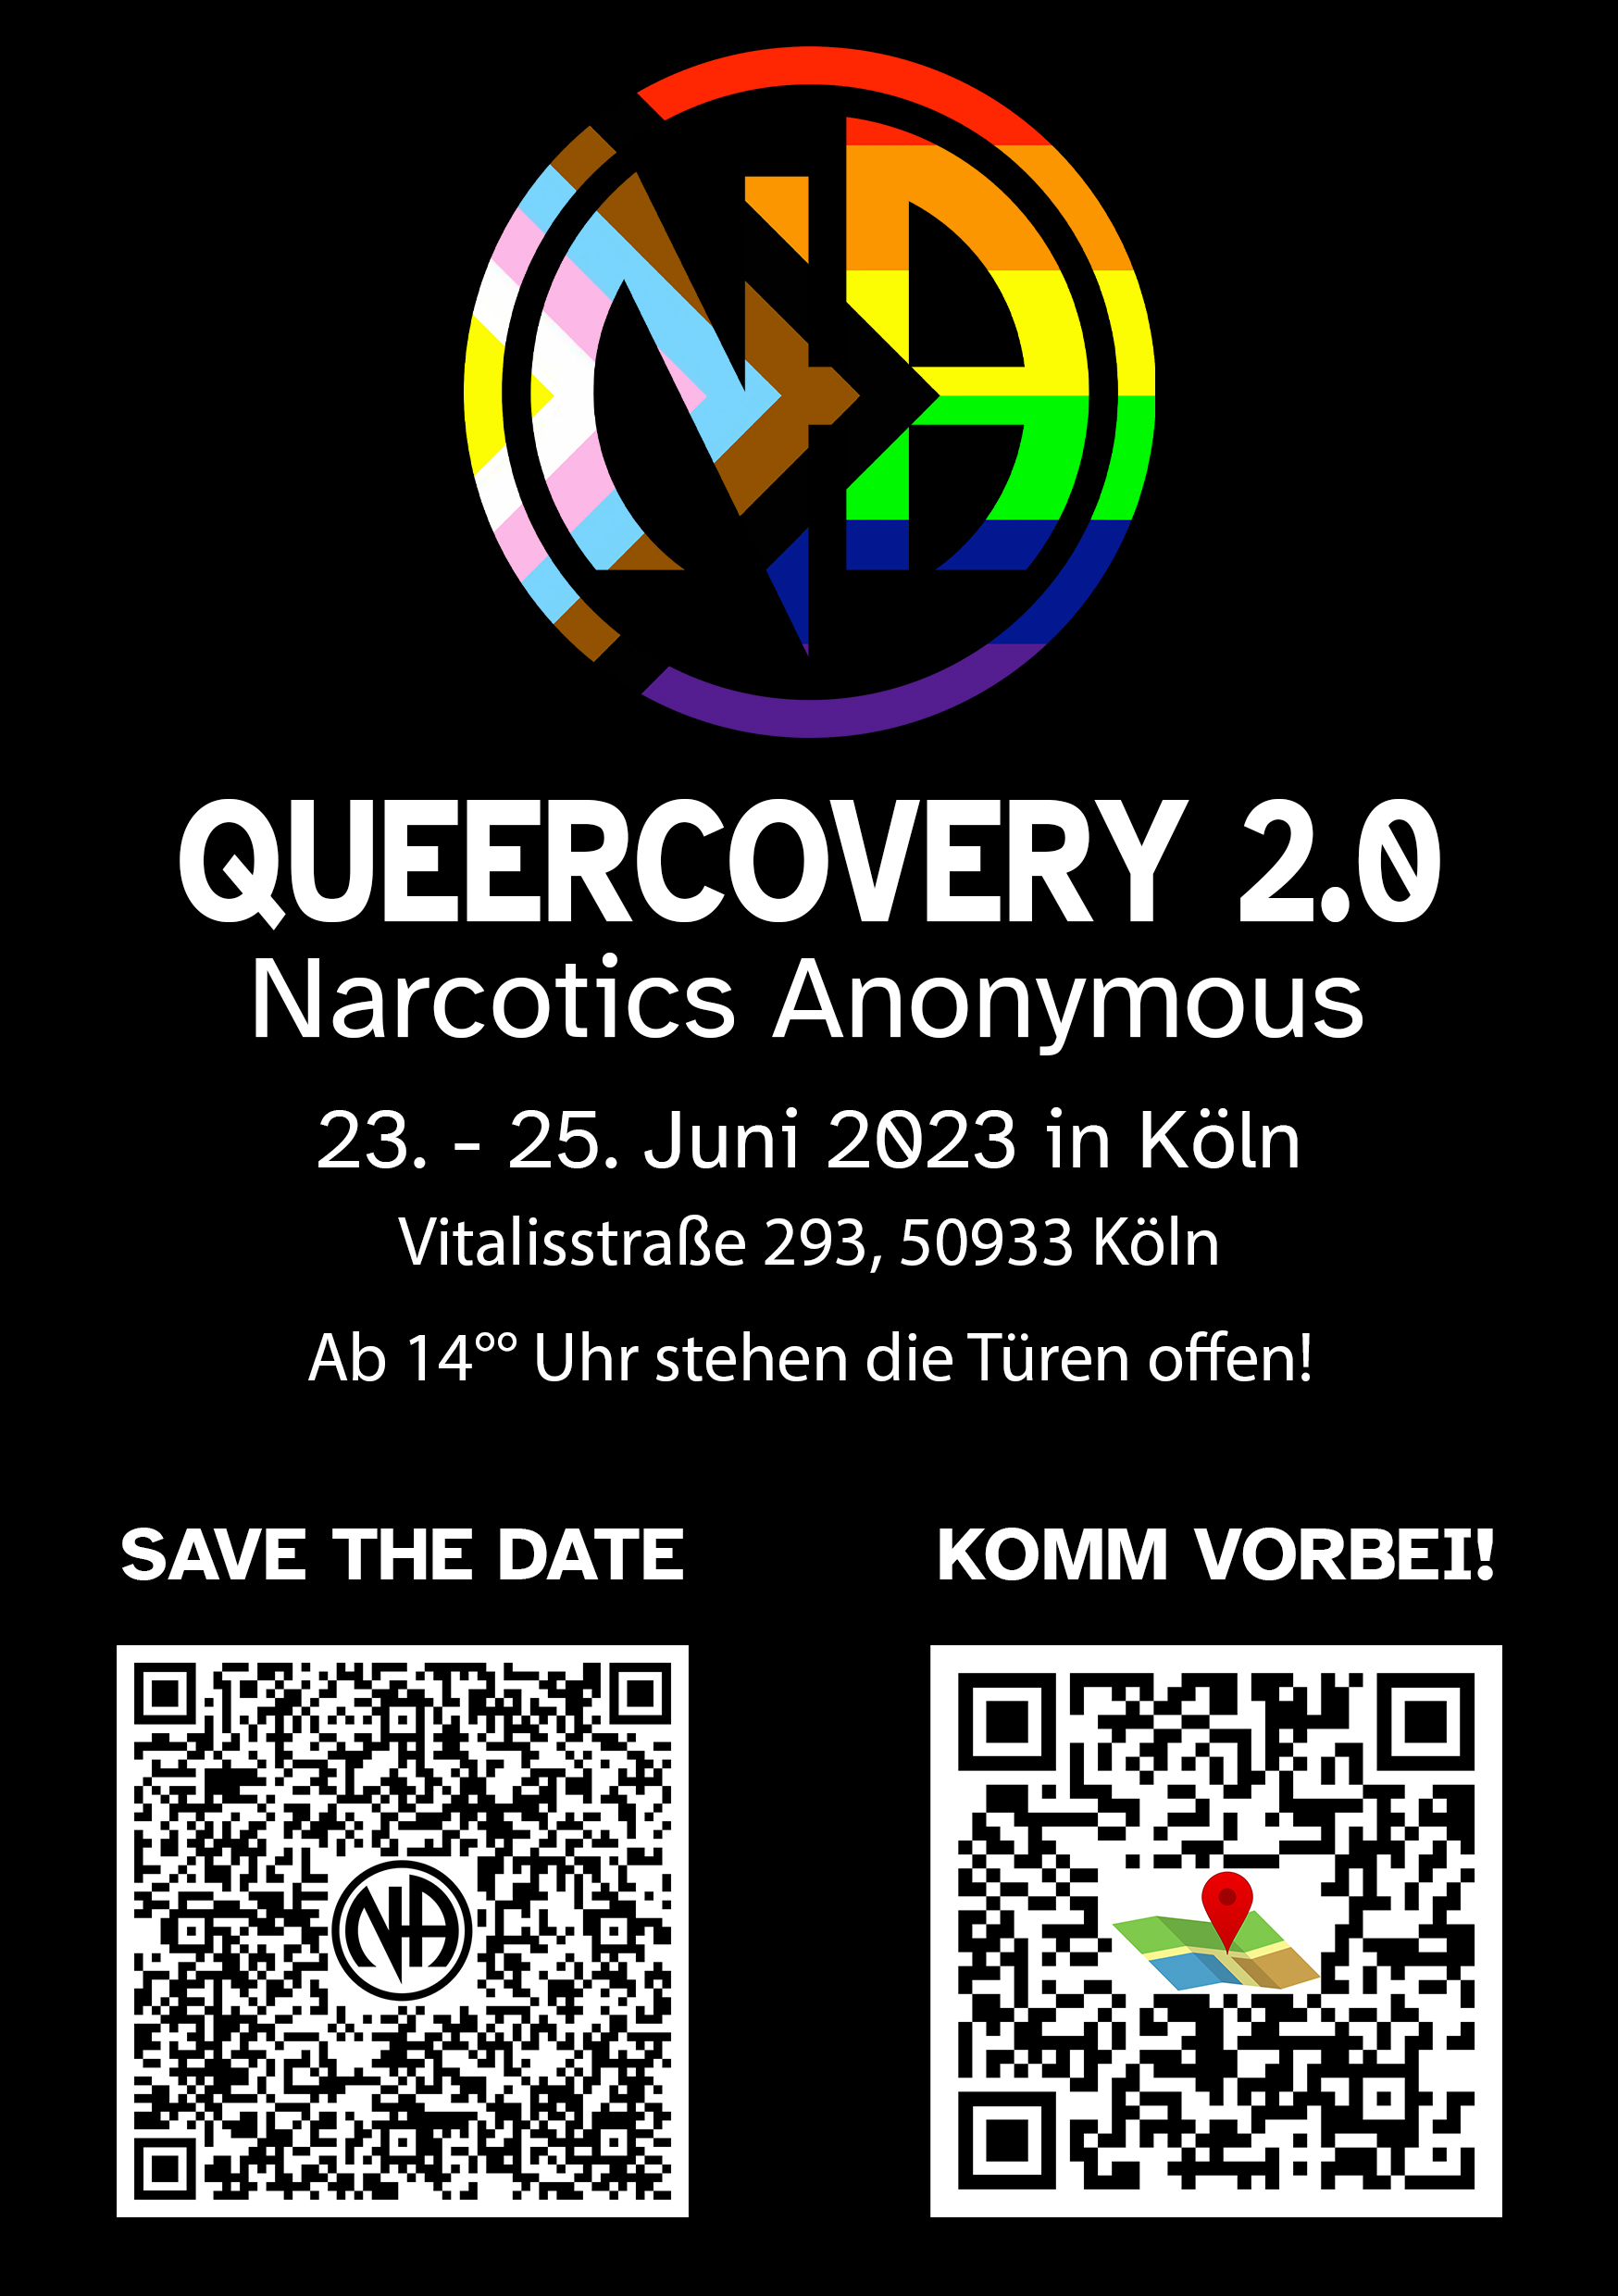 Queercovery Convention Köln